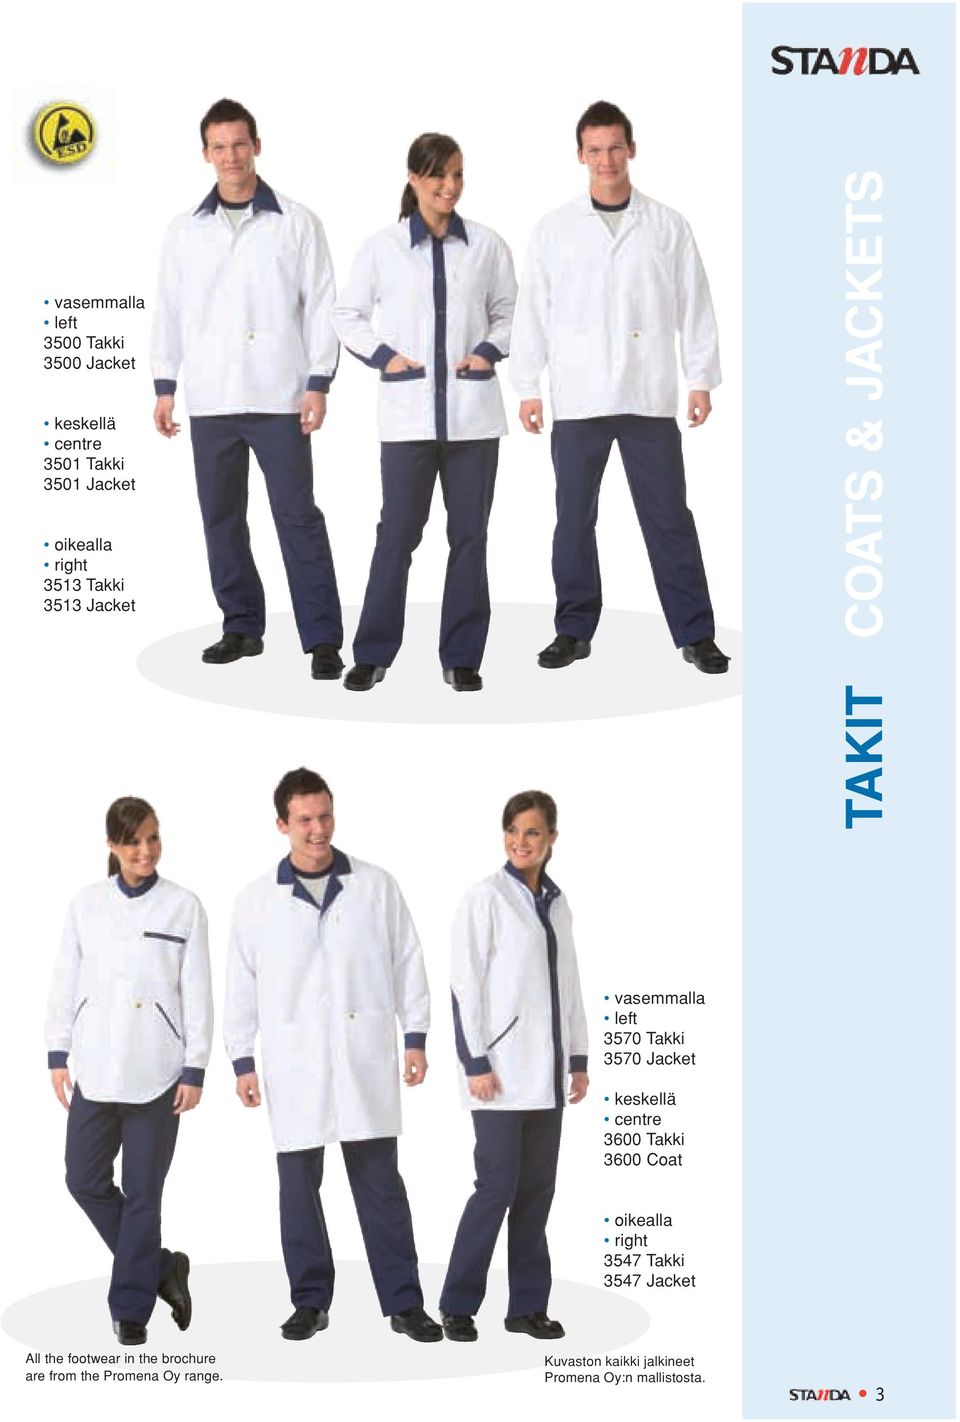 3547 Takki 3547 Jacket All the footwear in the brochure are from the